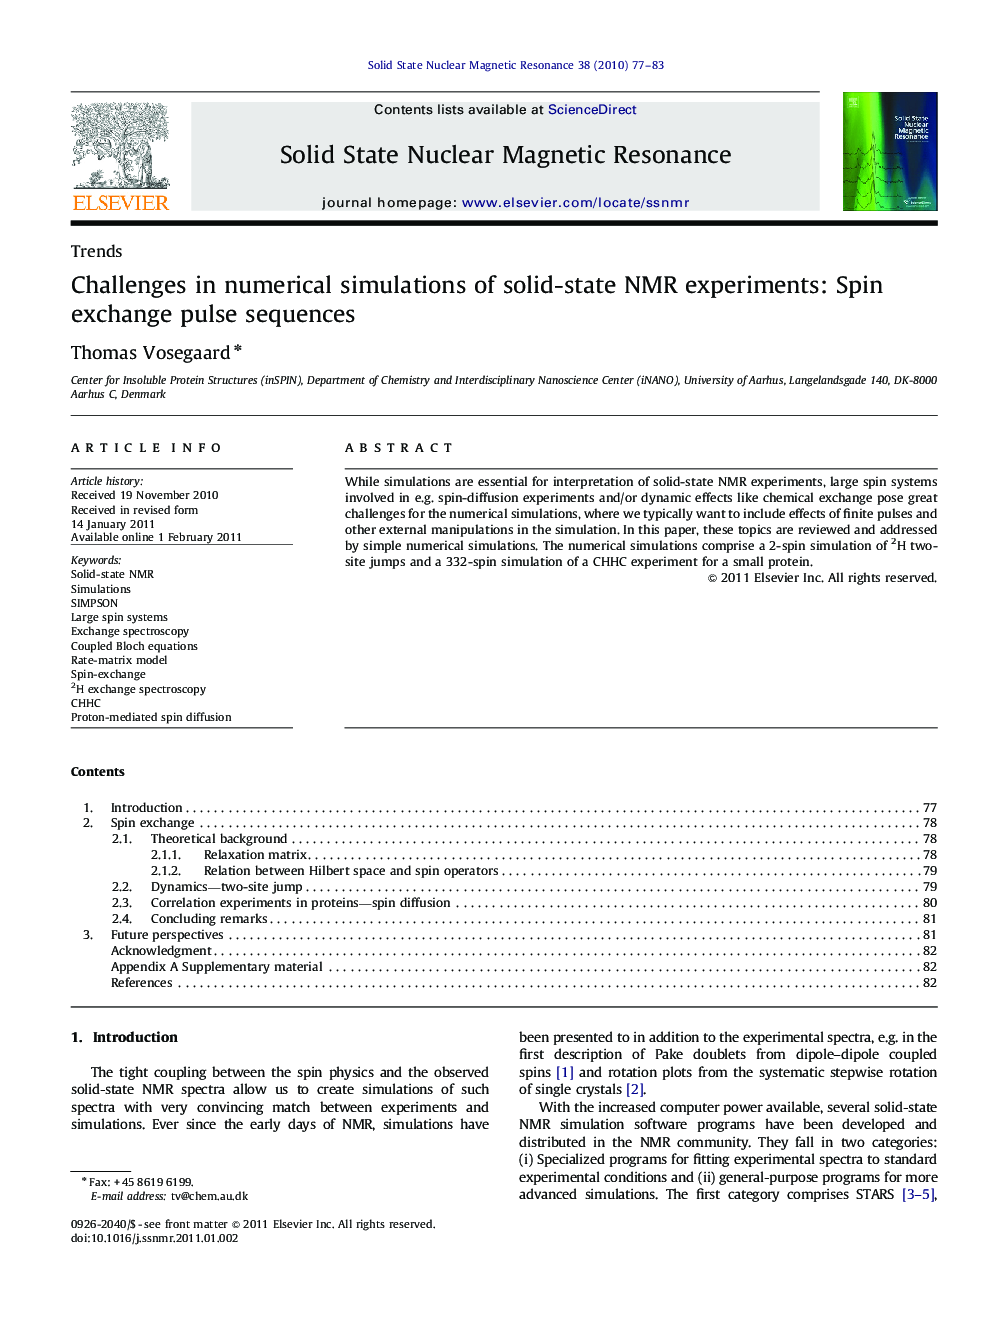 Challenges in numerical simulations of solid-state NMR experiments: Spin exchange pulse sequences